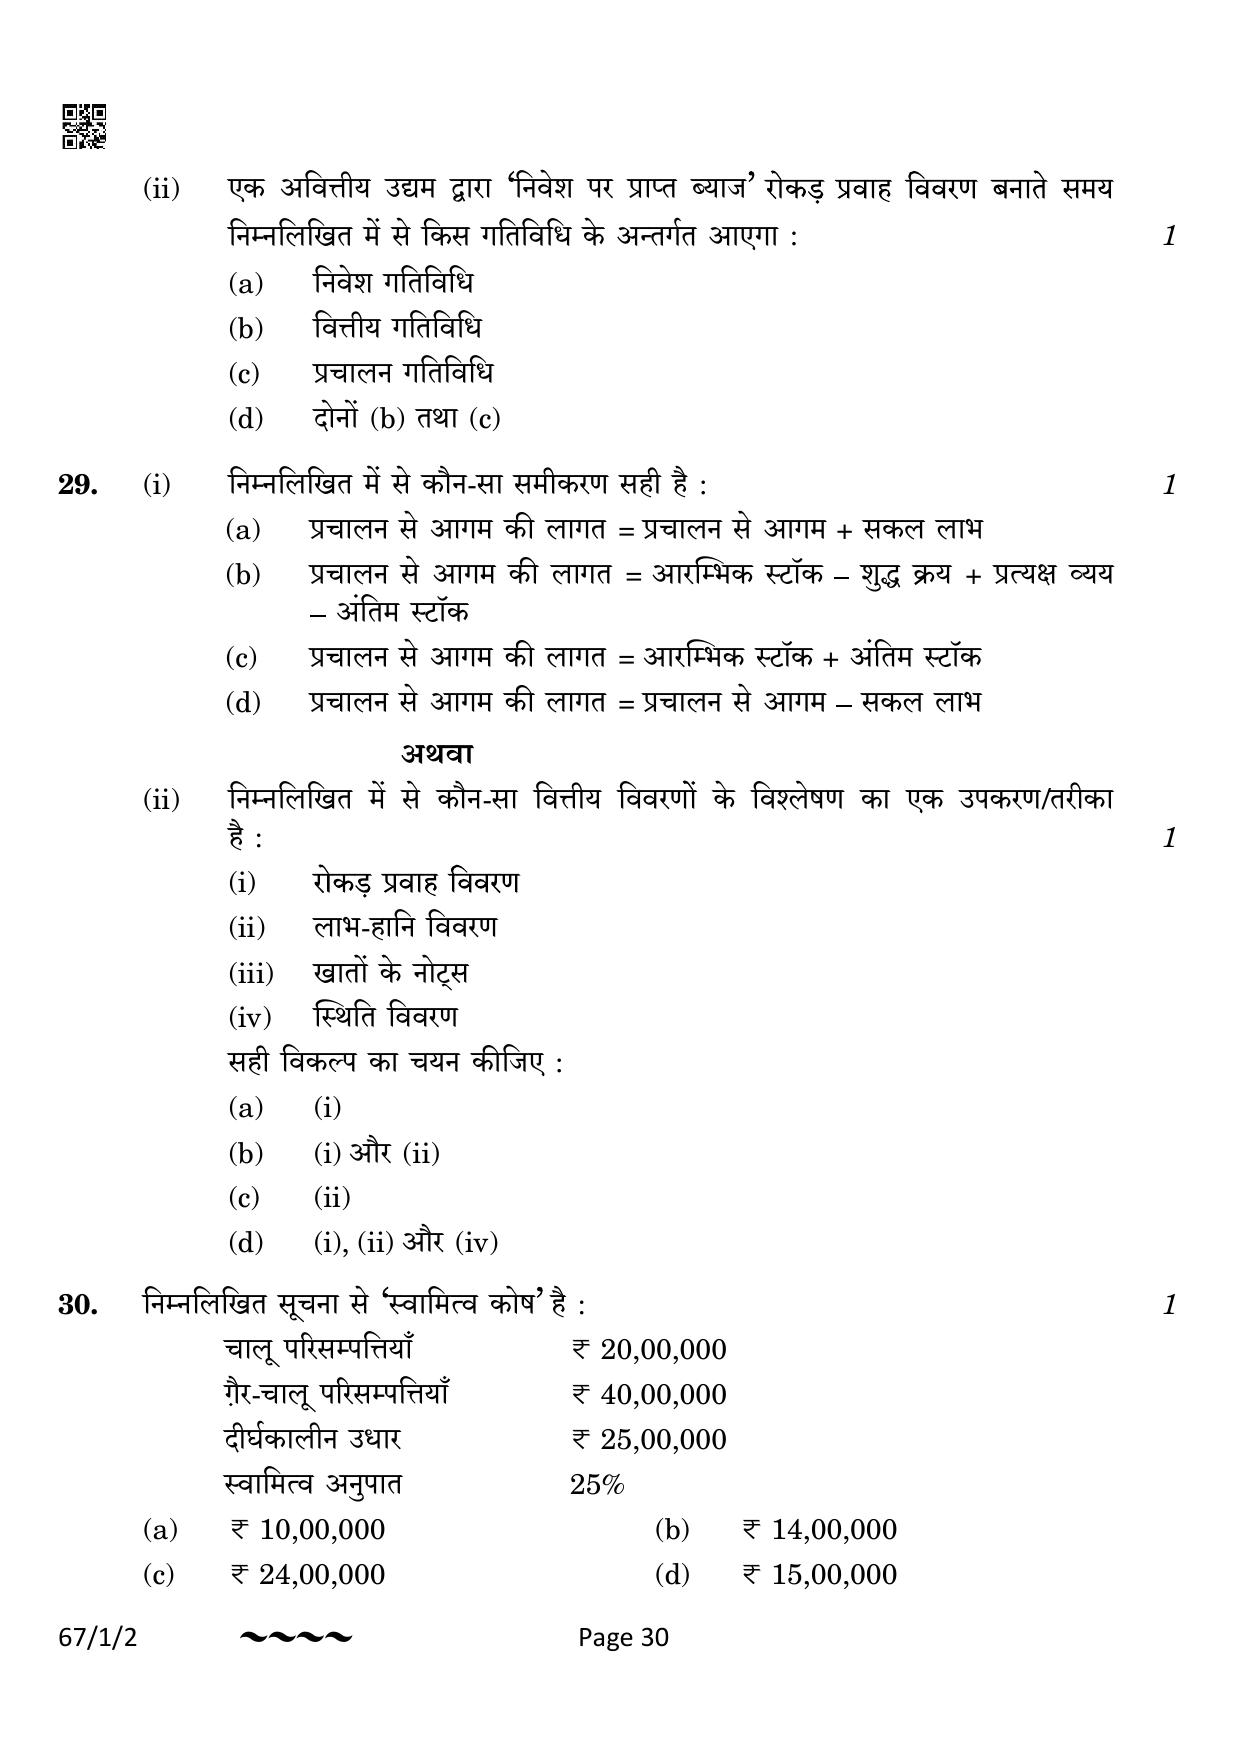 CBSE Class 12 67-1-2 Accountancy 2023 Question Paper - Page 30